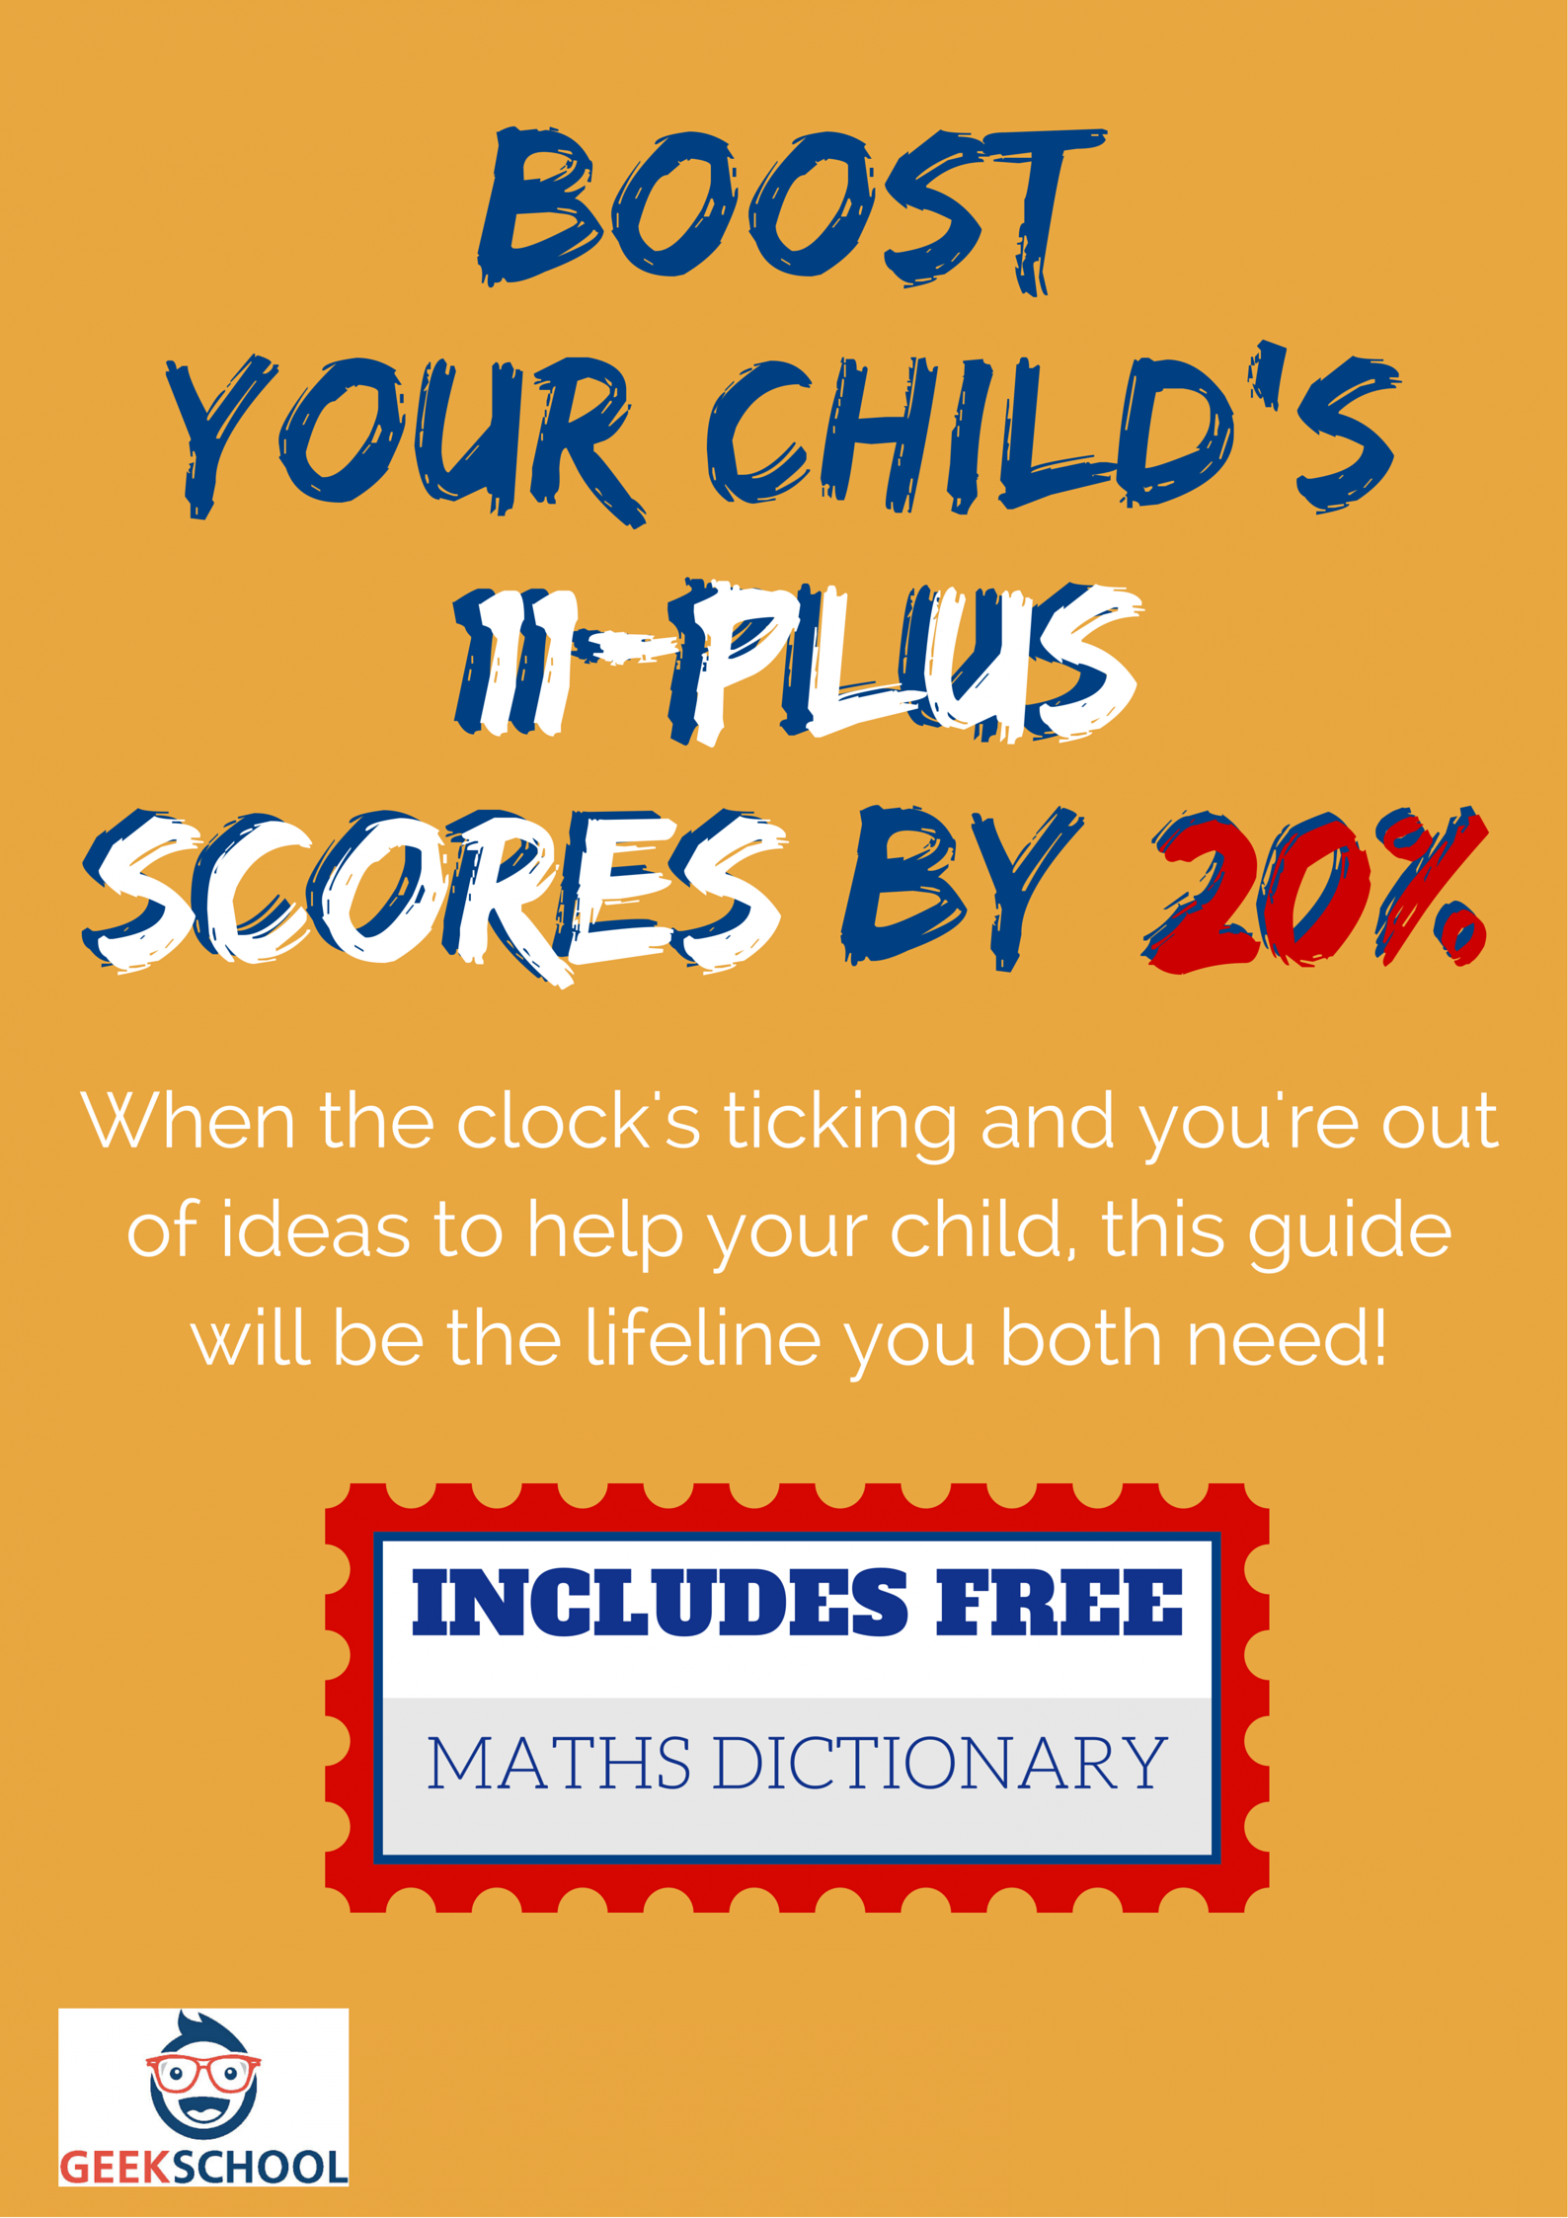 Boost your child’s maths scores by 20% with this easy-to-follow guide